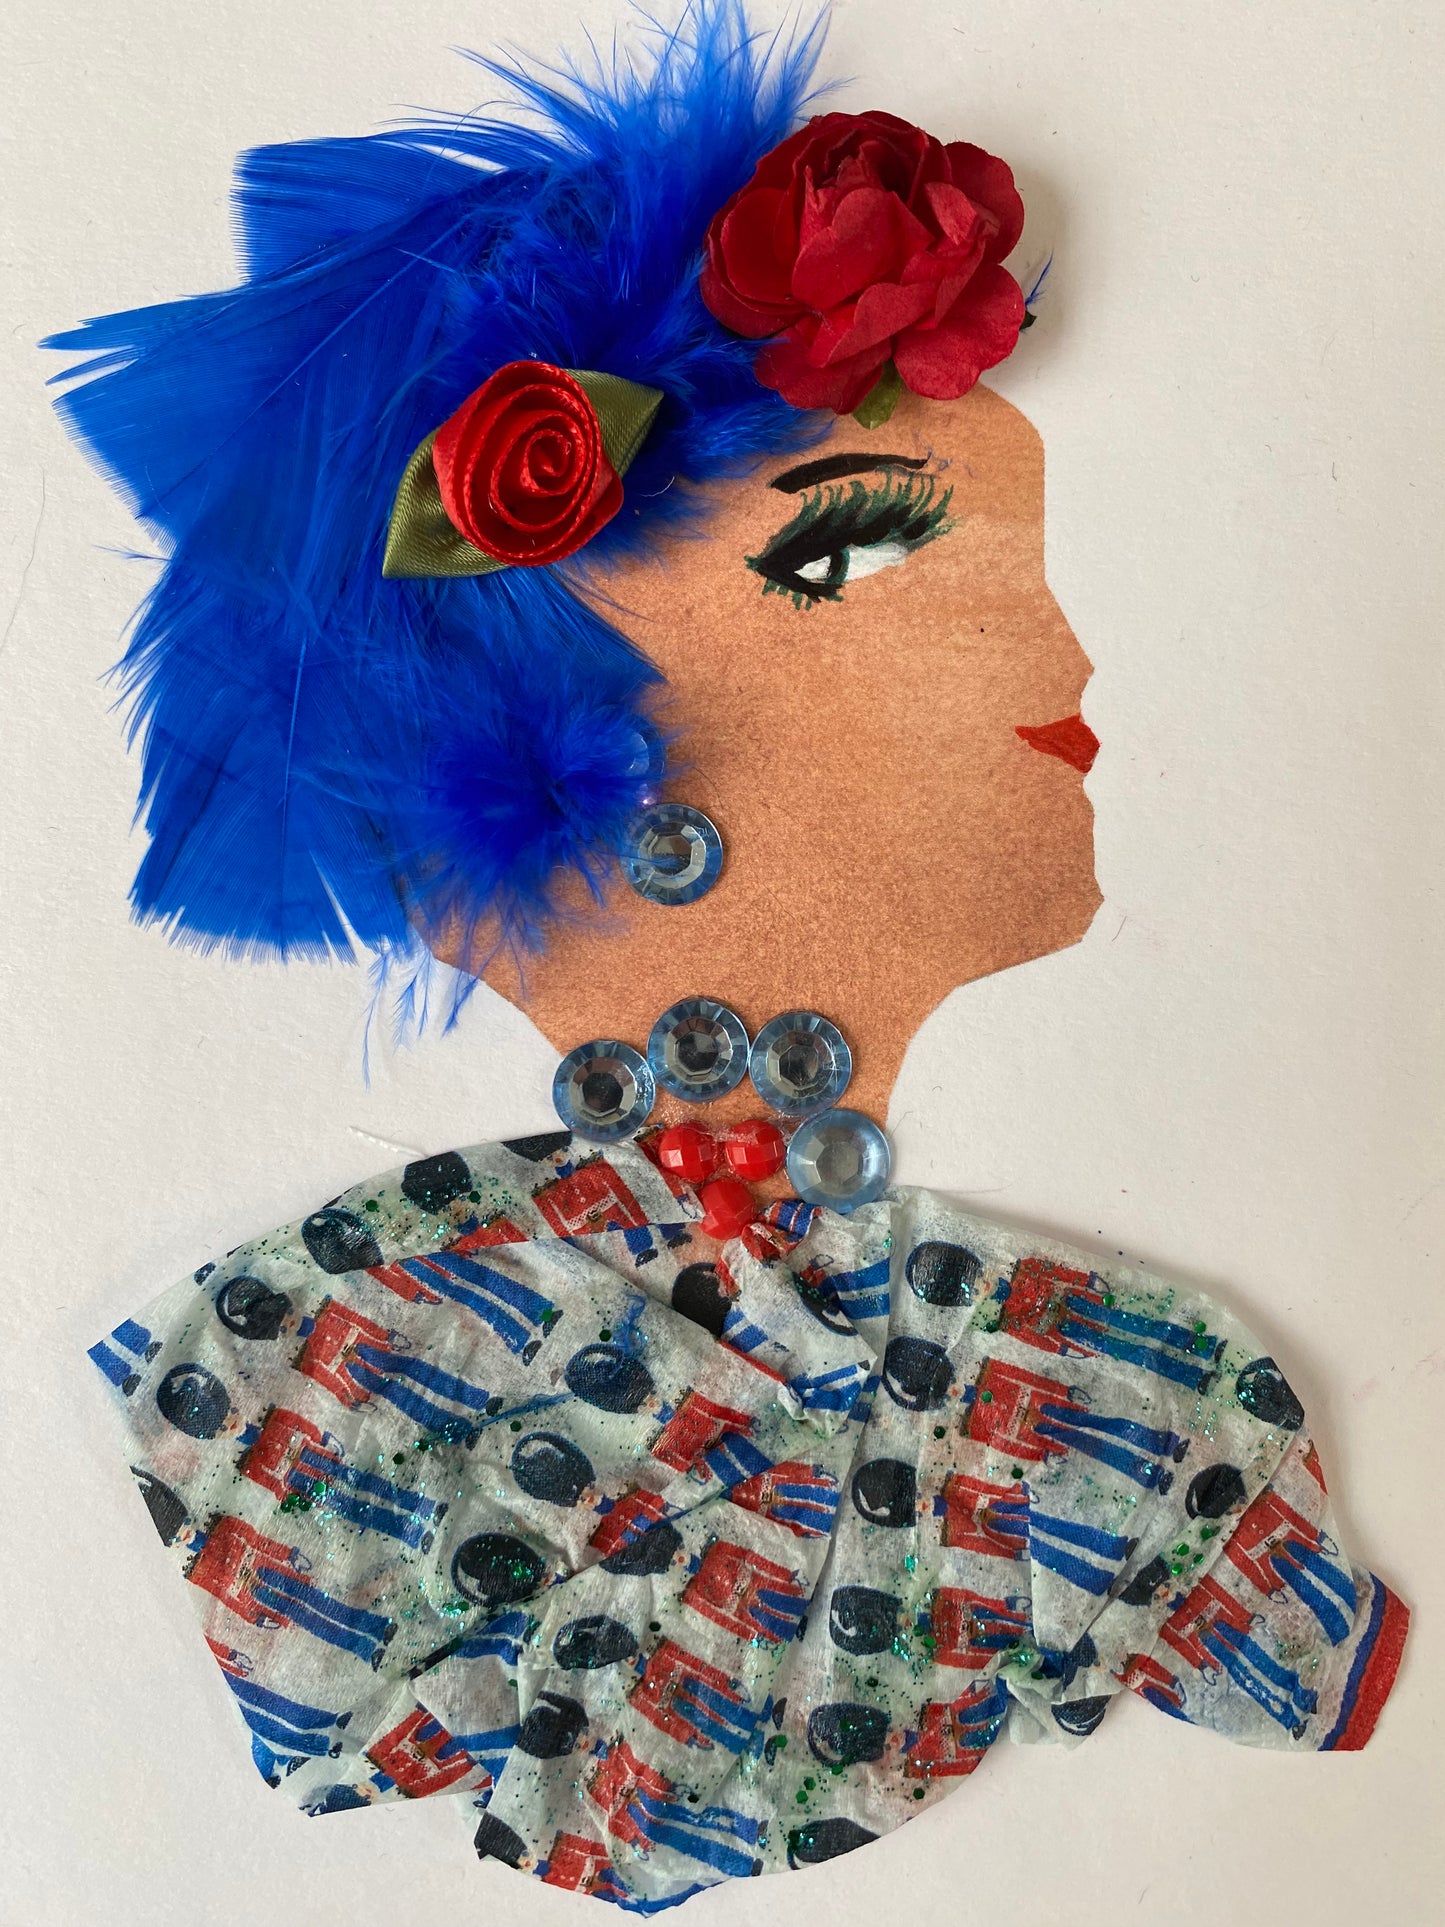 I designed this card of a woman named Baker Street Apple. She has a white skin tone and is wearing two gorgeous red roses in her hair. She wears a blouse that has a unique pattern on it. She wears blue and red jewellery. 